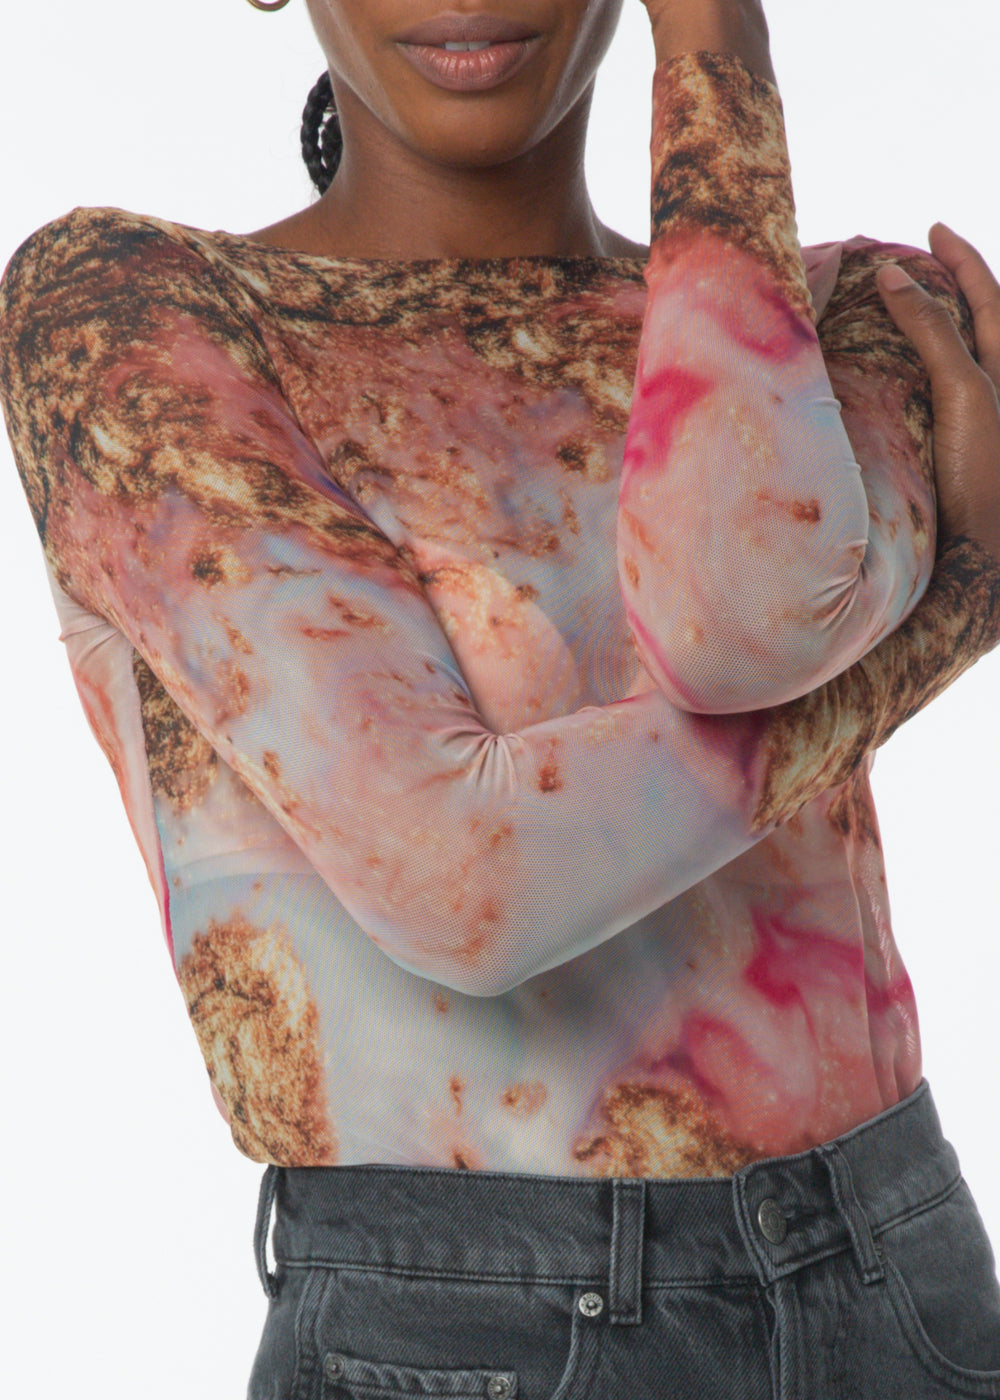 Web Exclusive Print - Galaxy Giselle Mesh Top